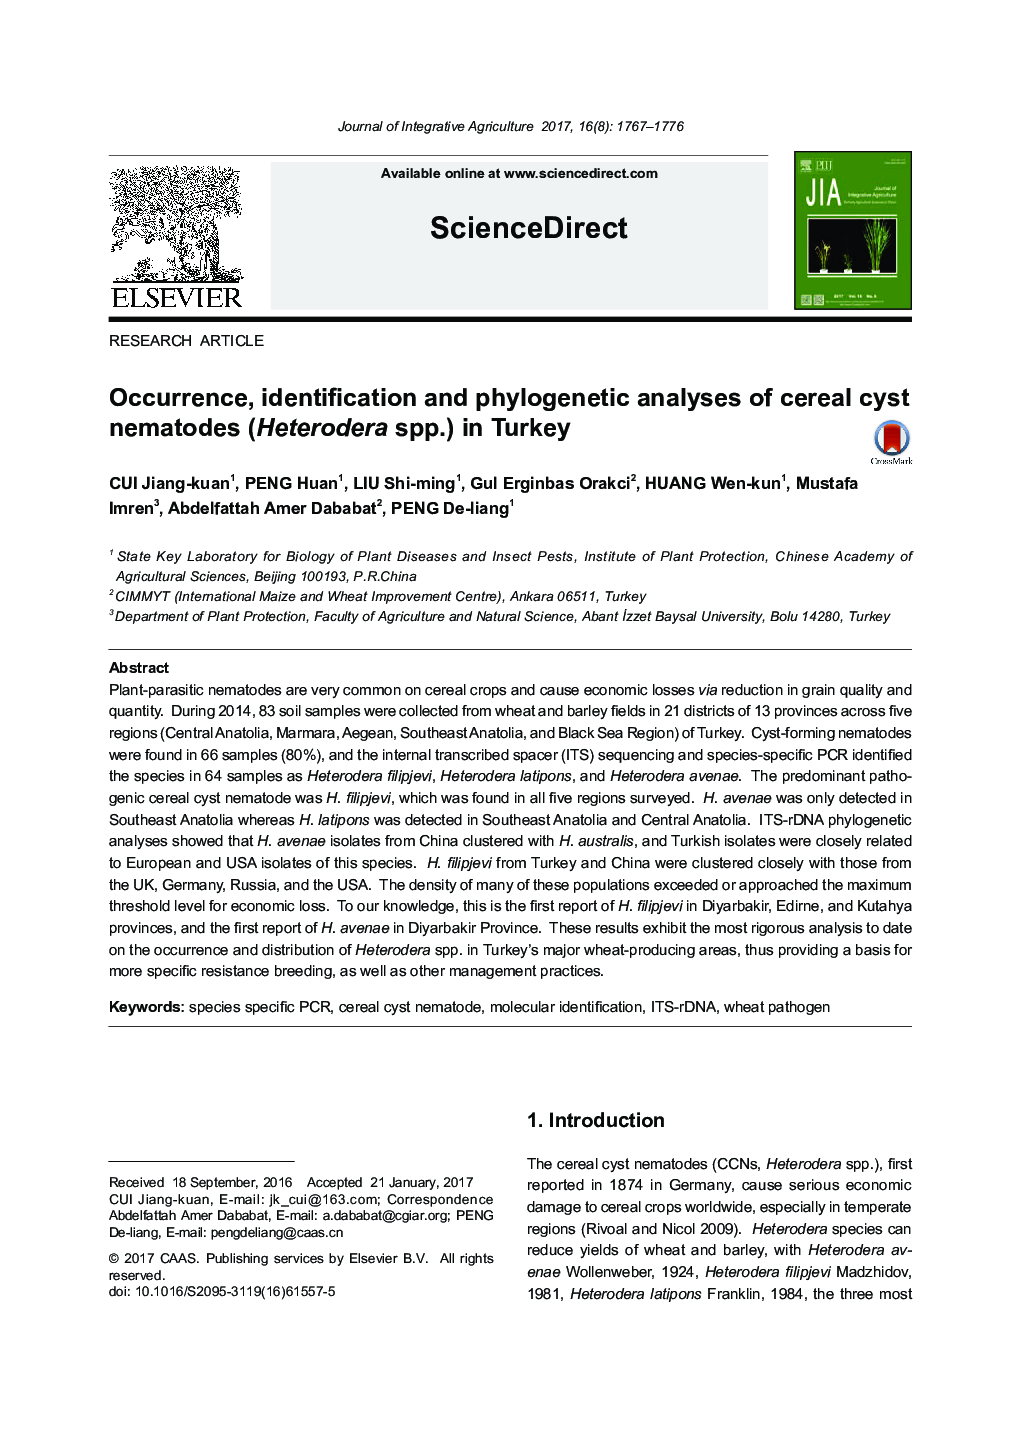 Occurrence, identification and phylogenetic analyses of cereal cyst nematodes (Heterodera spp.) in Turkey